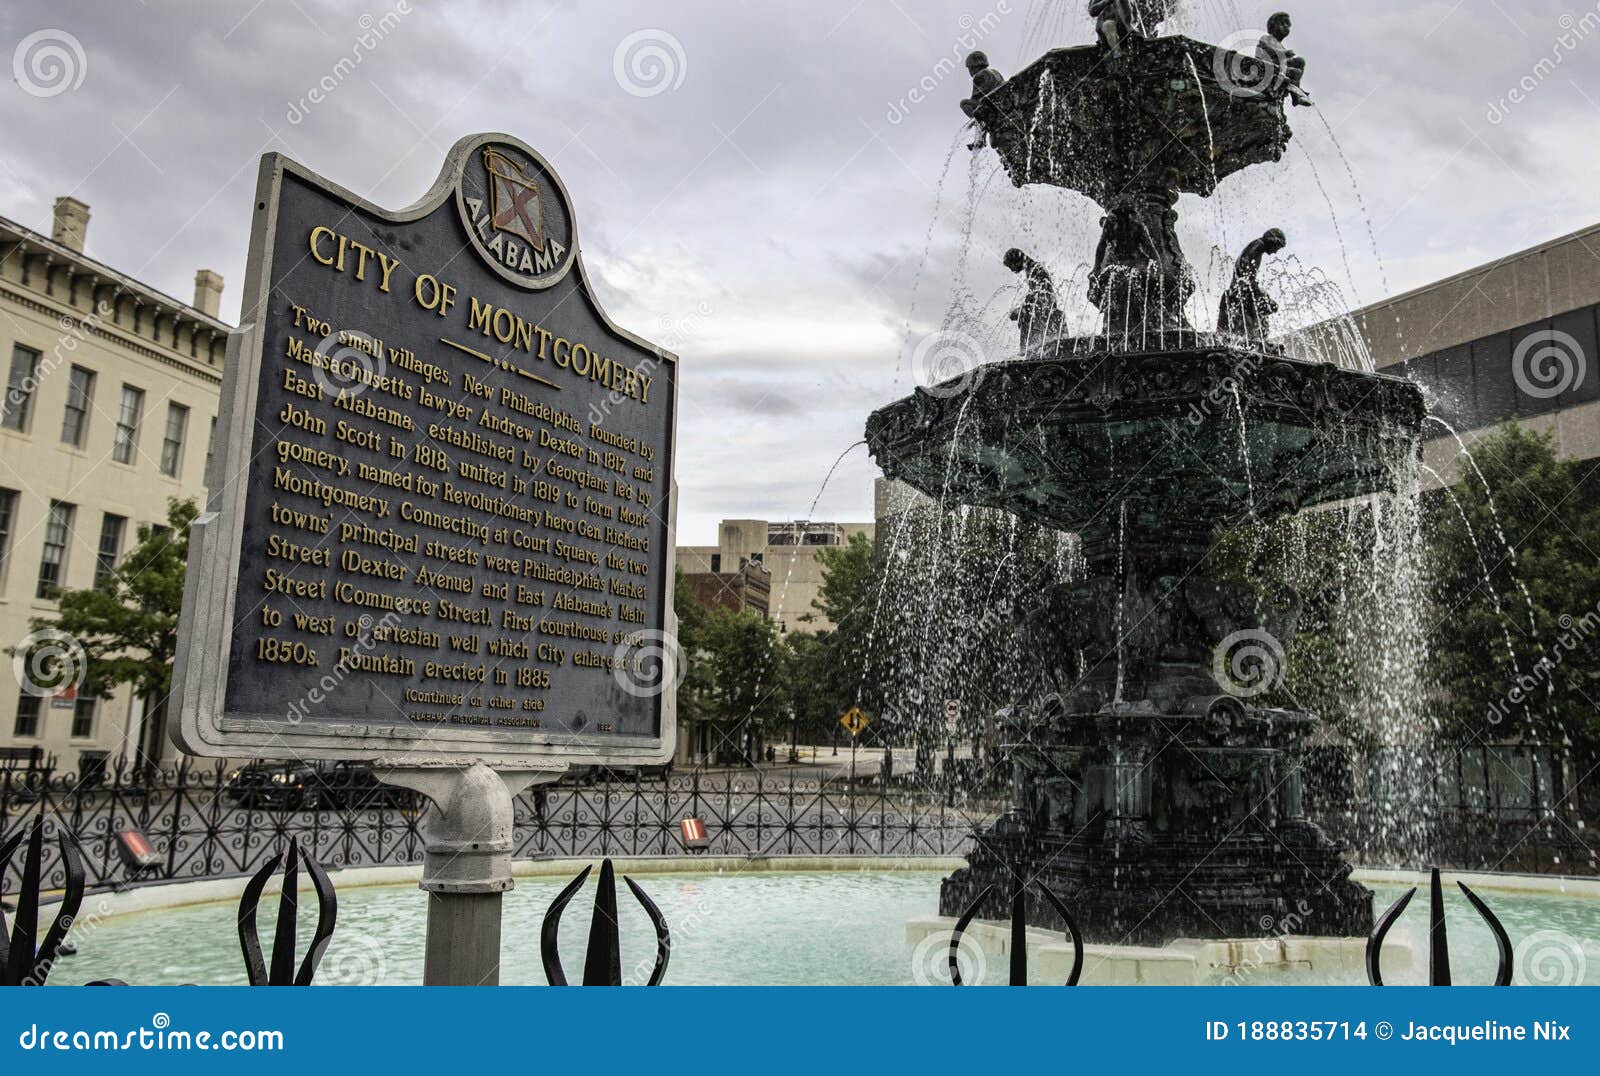 city-montgomery-sign-near-court-square-fountain-alabama-usa-june-historic-marker-next-to-downtown-188835714.jpg